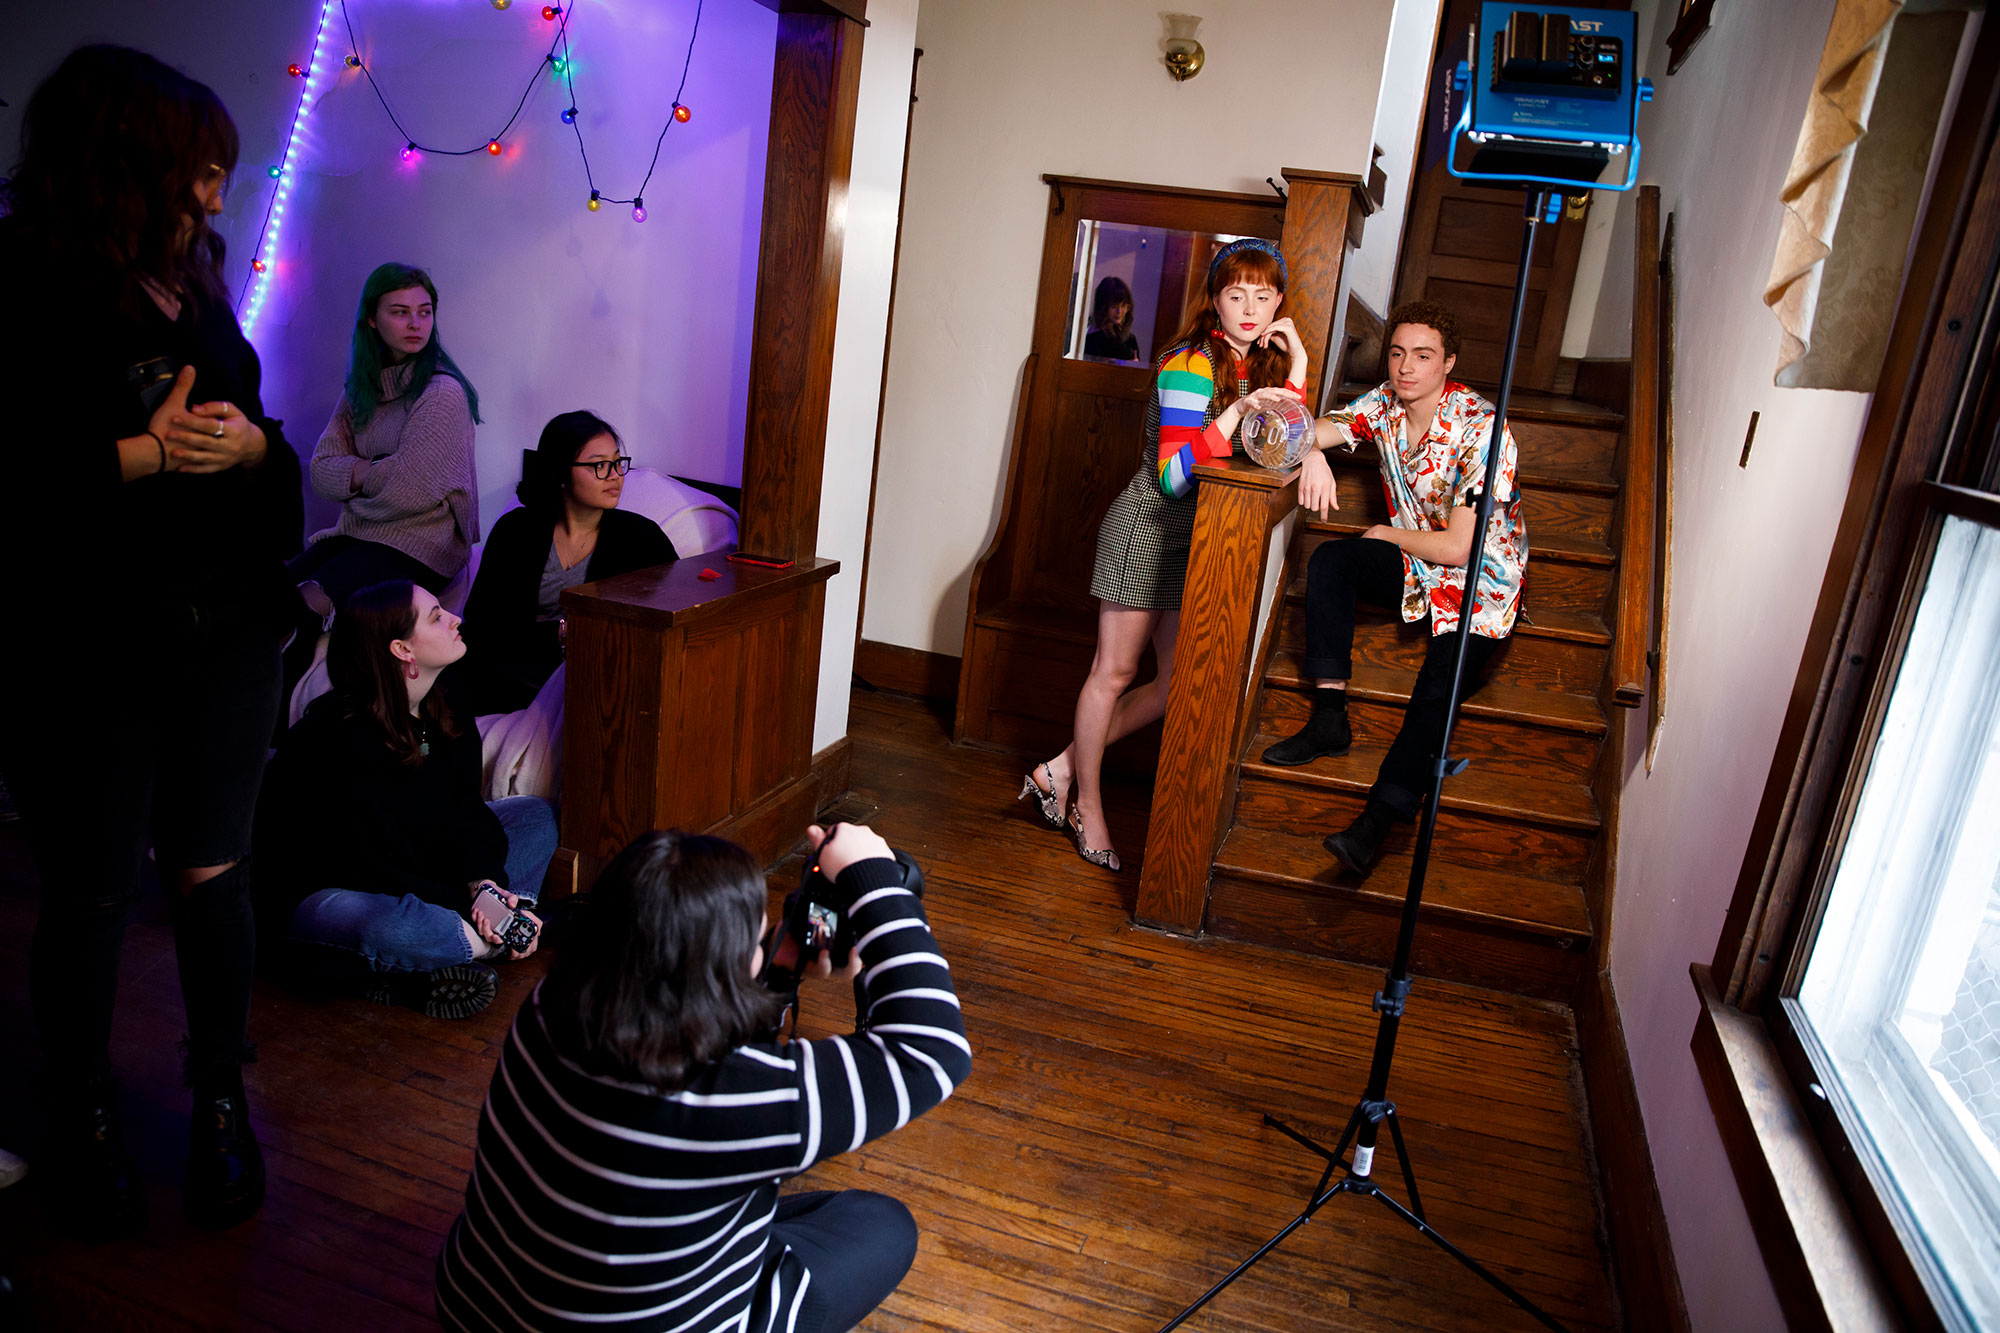 A fashion photo shoot in a house. The two models are on a staircase holding a hamster in a ball.